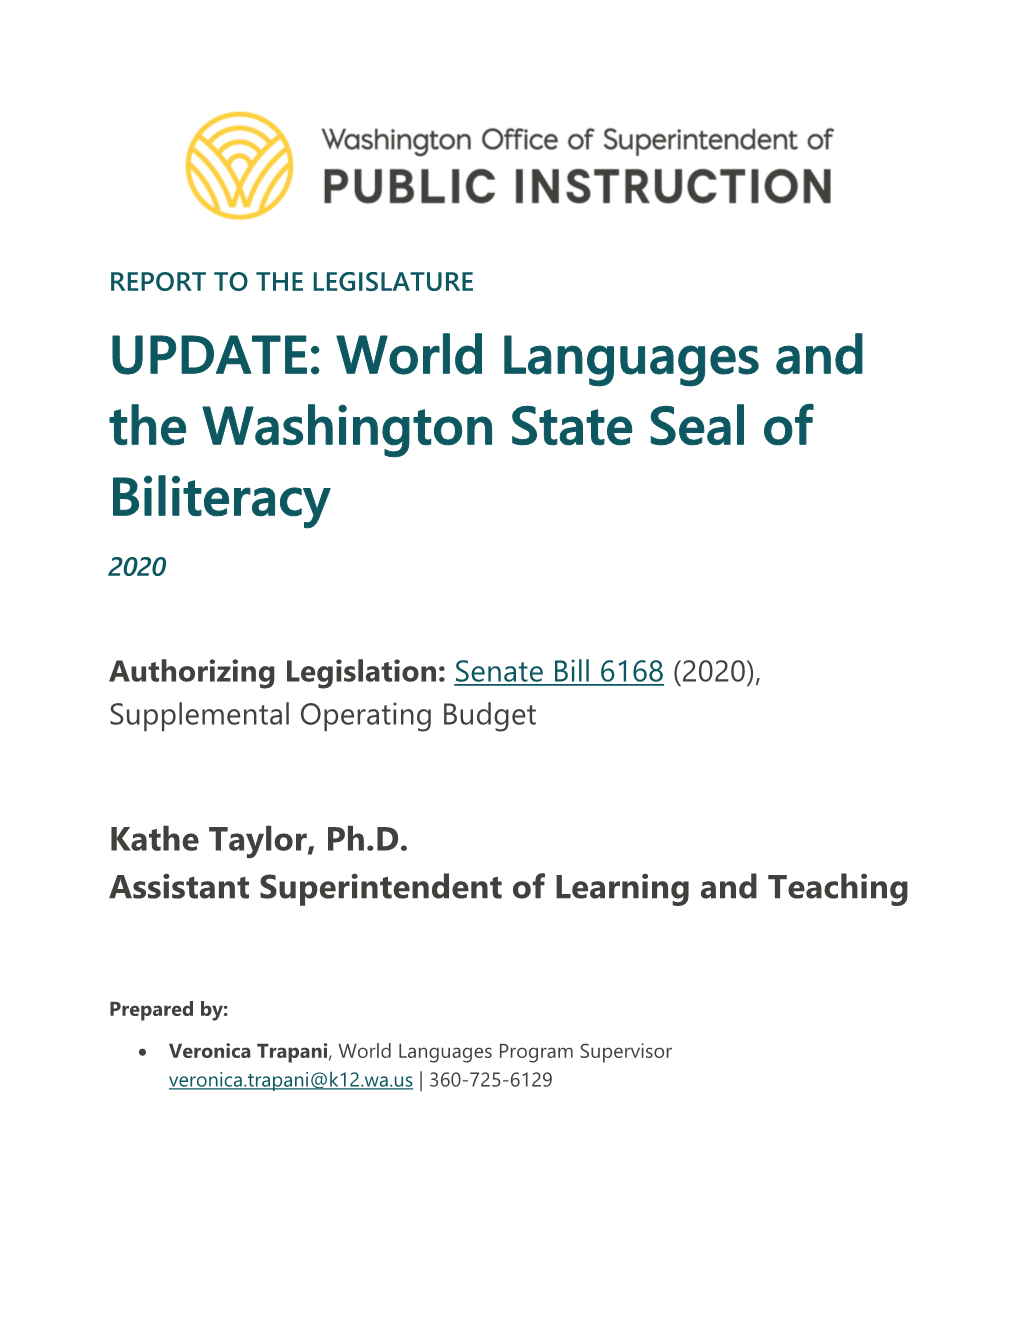 World Languages and the Washington State Seal of Biliteracy